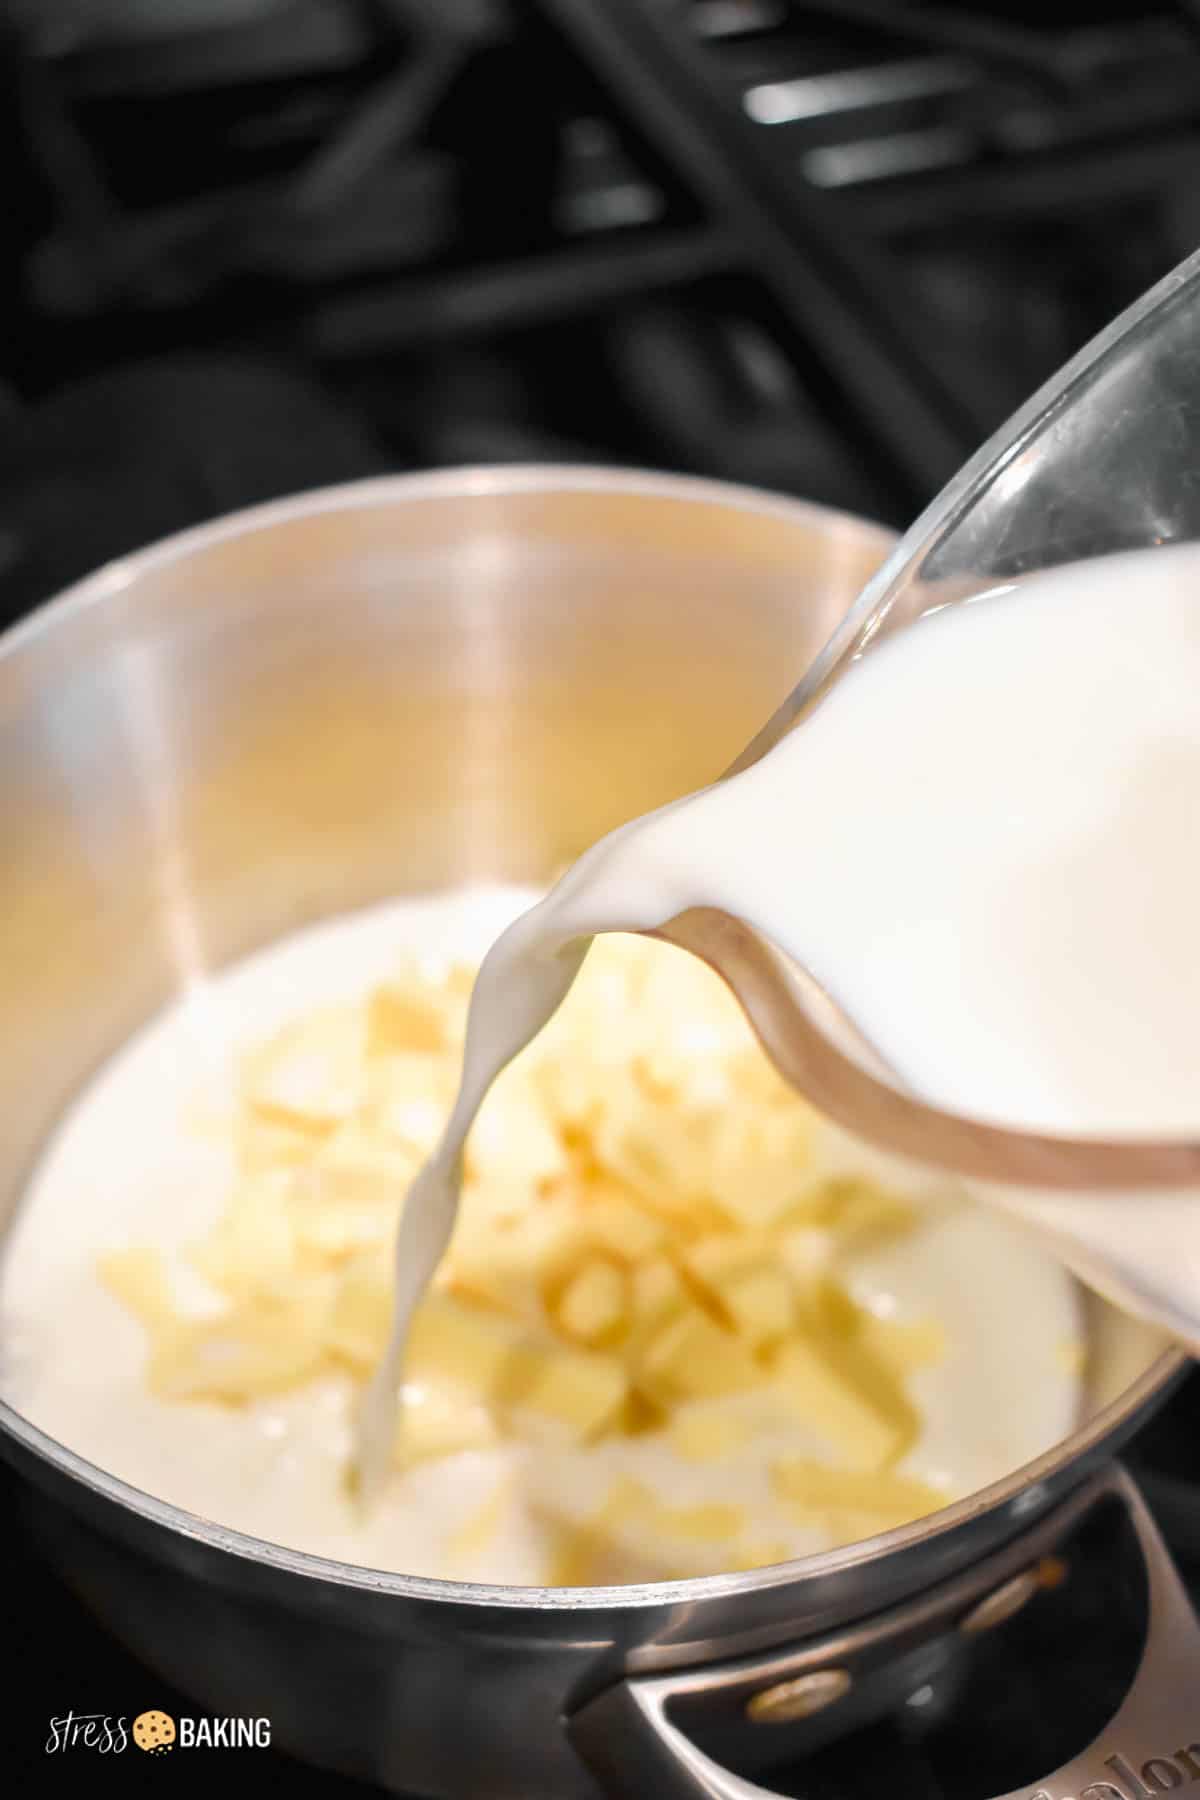 Milk being poured into a saucepan of chopped white chocolate